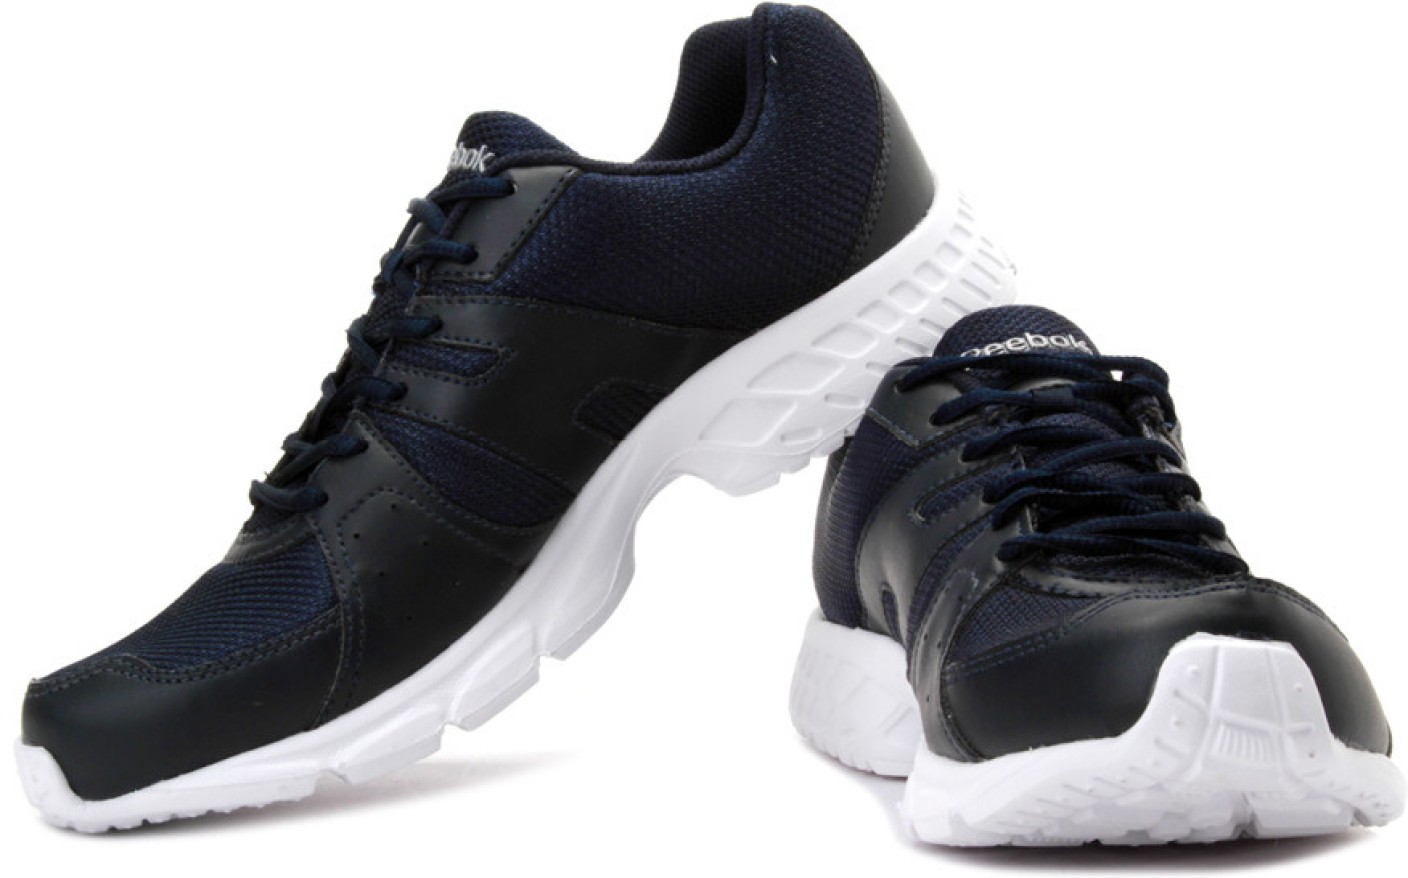 Reebok Top Speed Lp Running Shoes For Men - Buy Navy, Silver Color ...